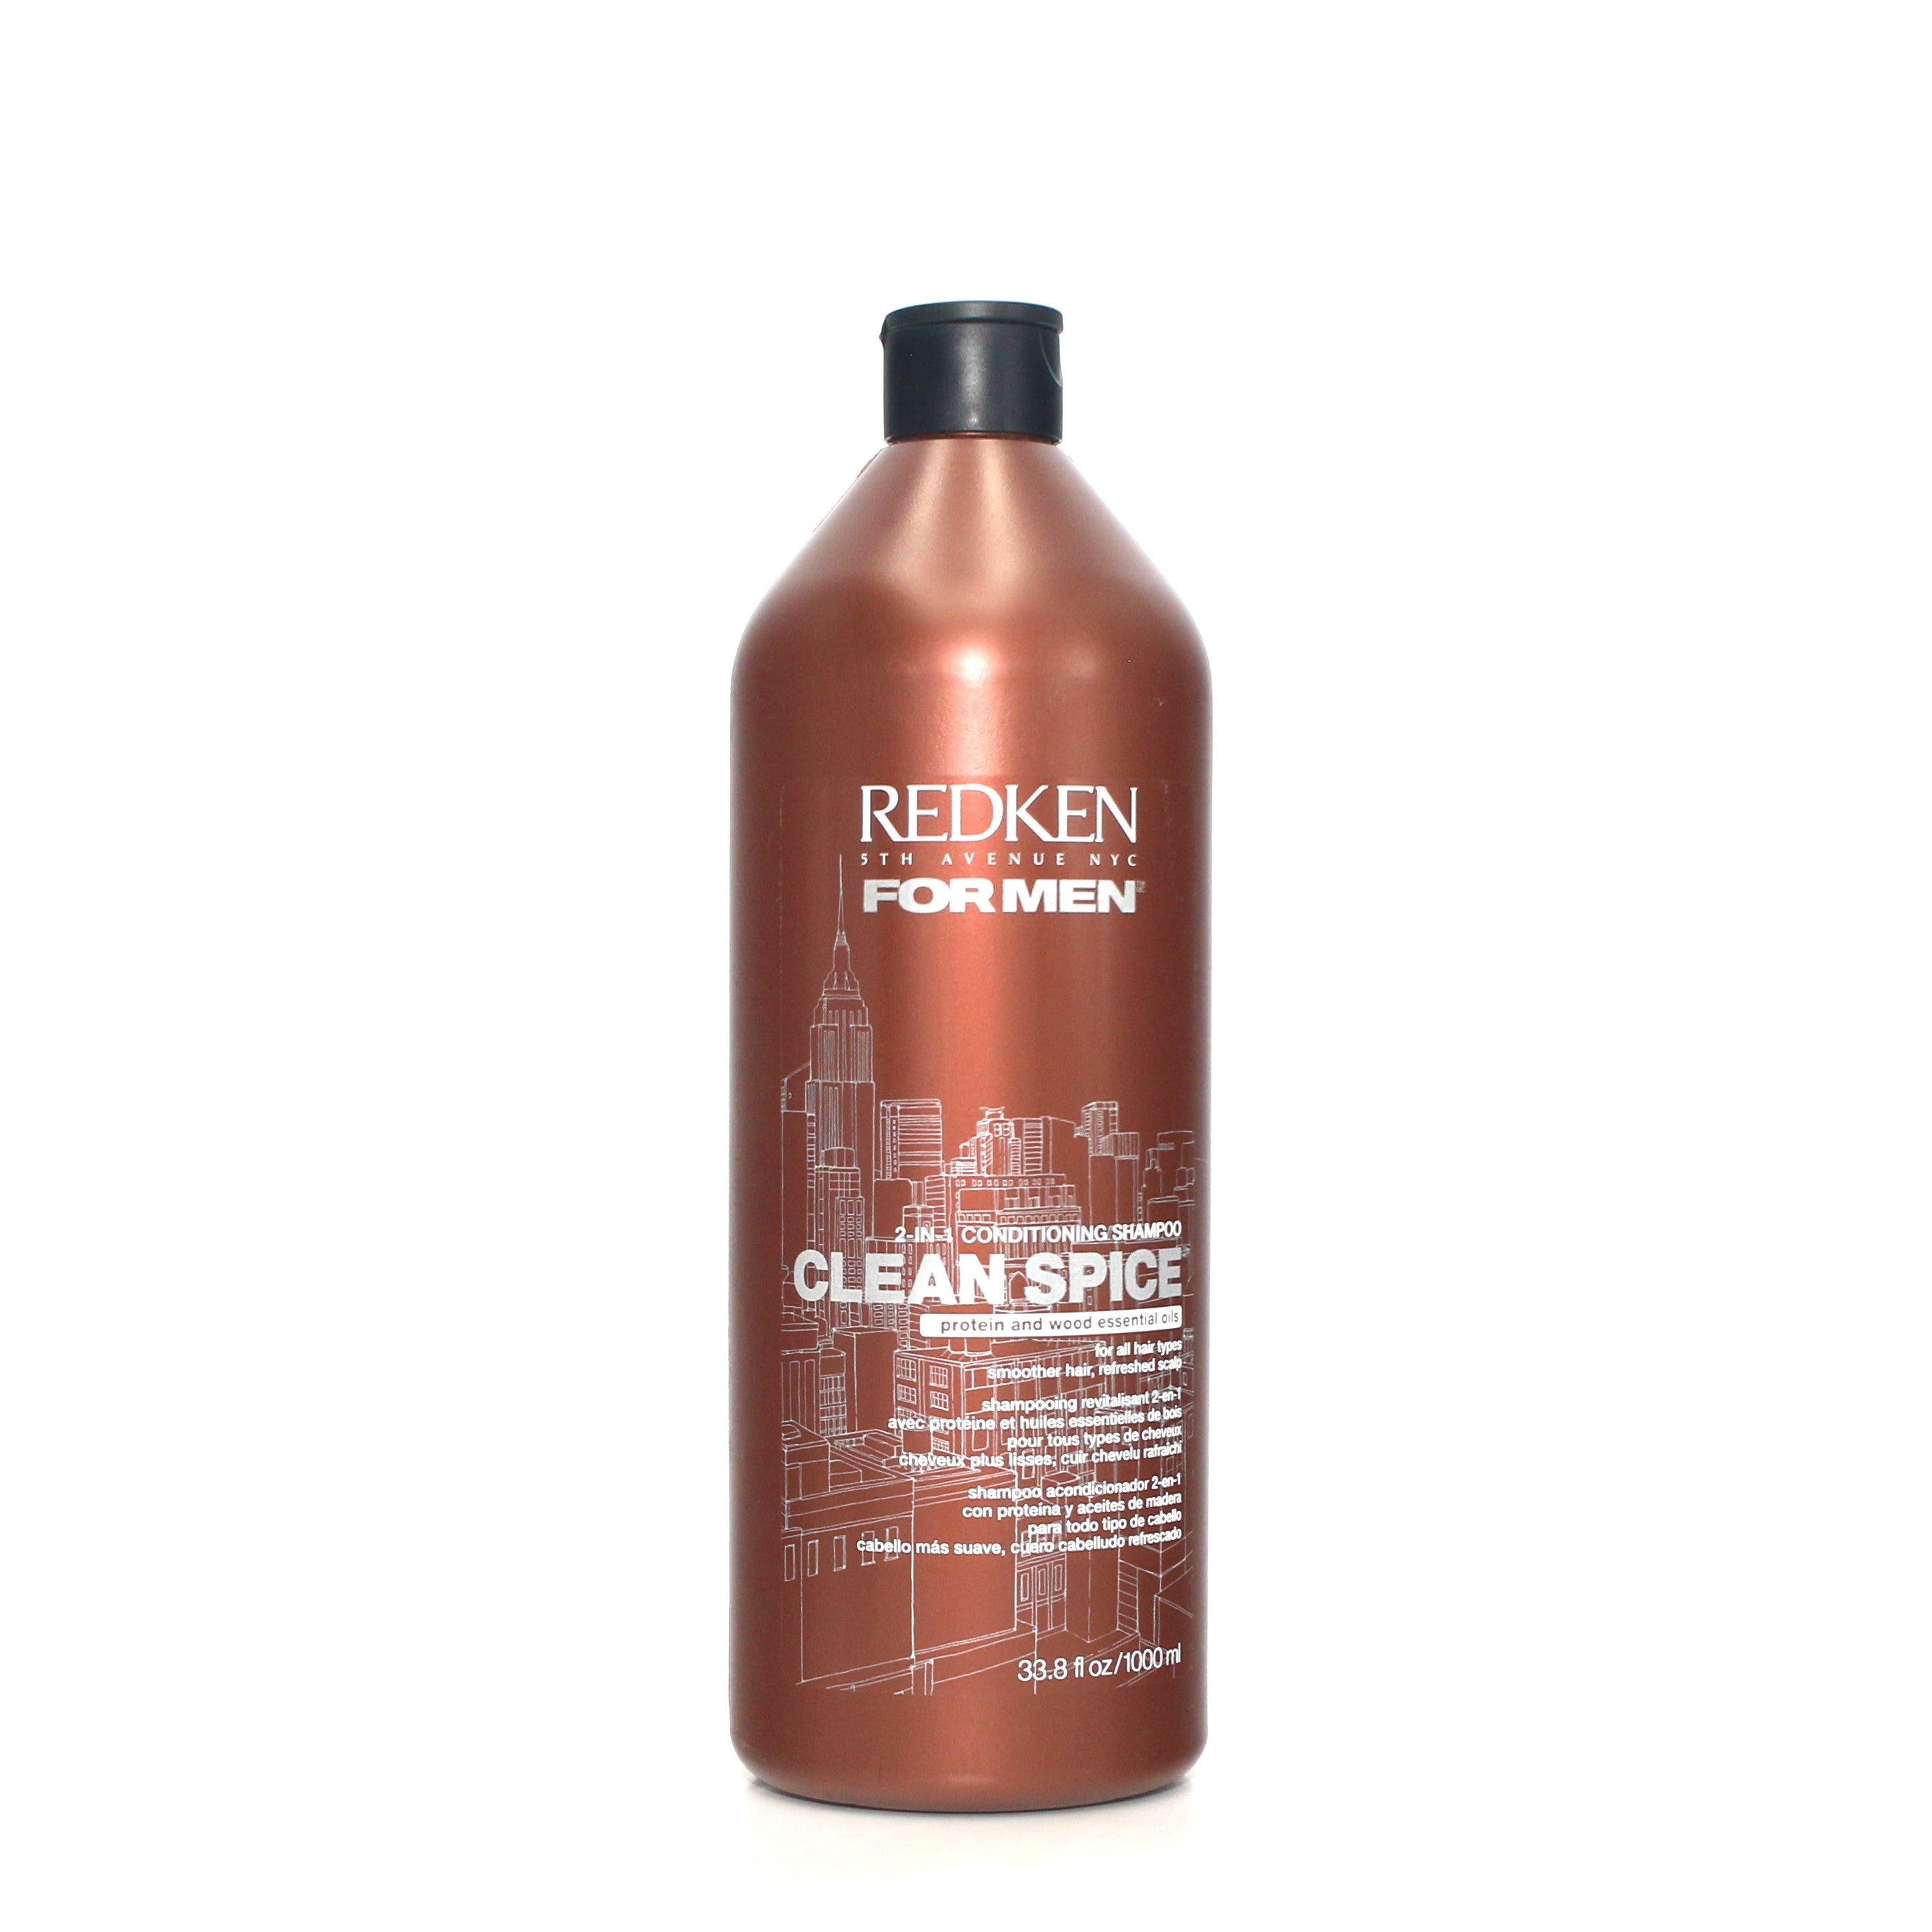 REDKEN For Men 2 in 1 Shampoo Clean Spice 33.8 oz – Overstock Beauty Supply